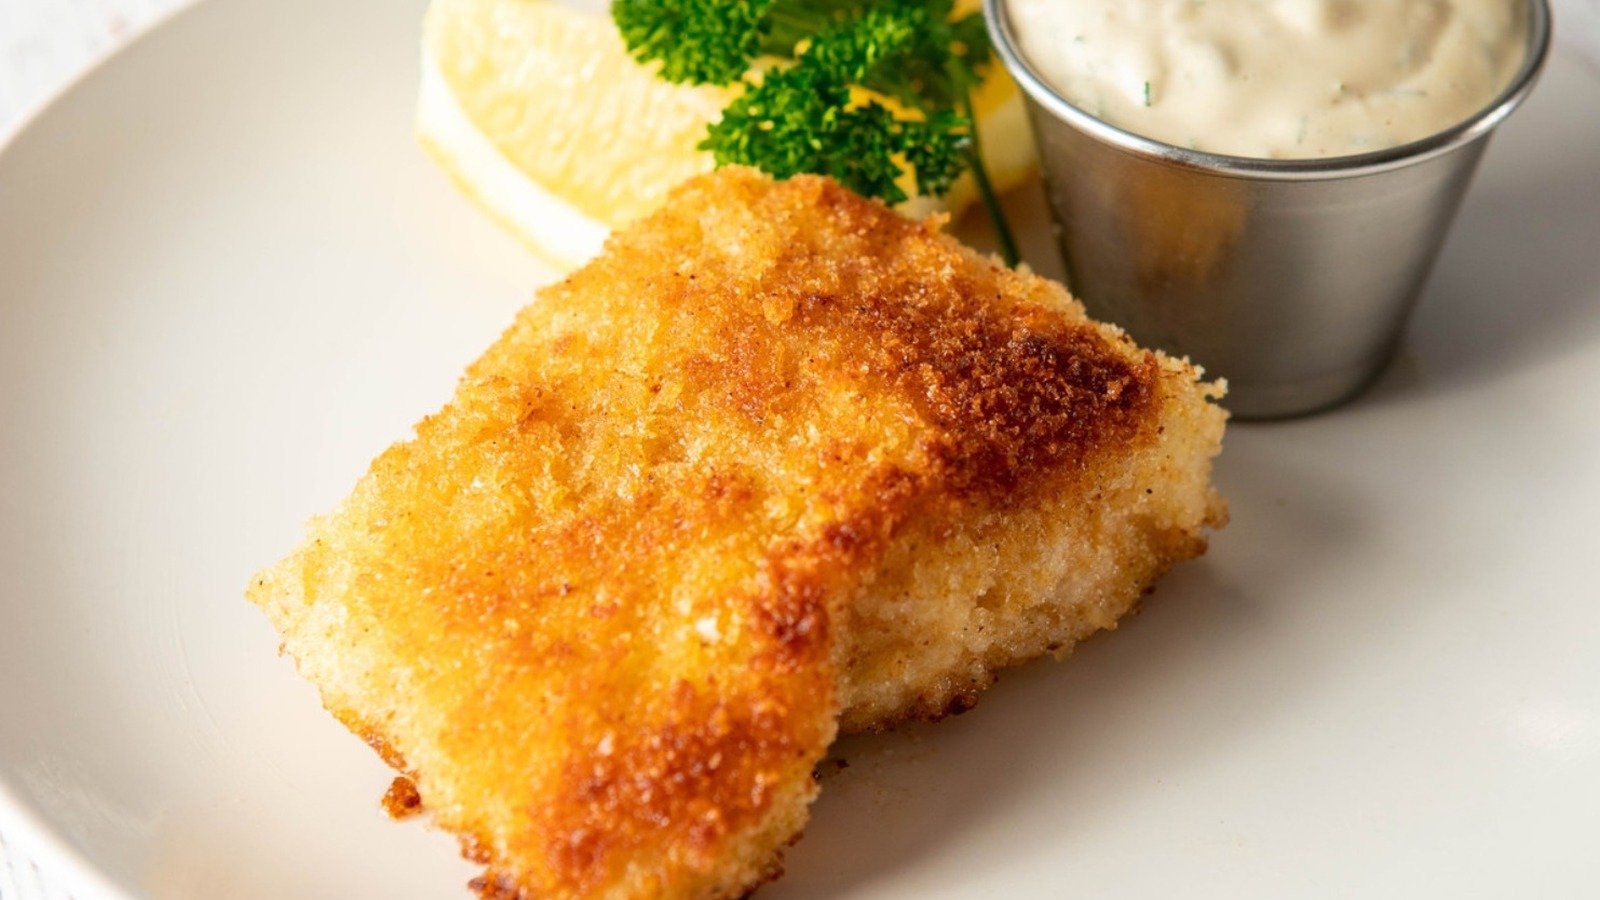 A Breaded Cod Recipe That Makes Fish Night Oh-So Tasty